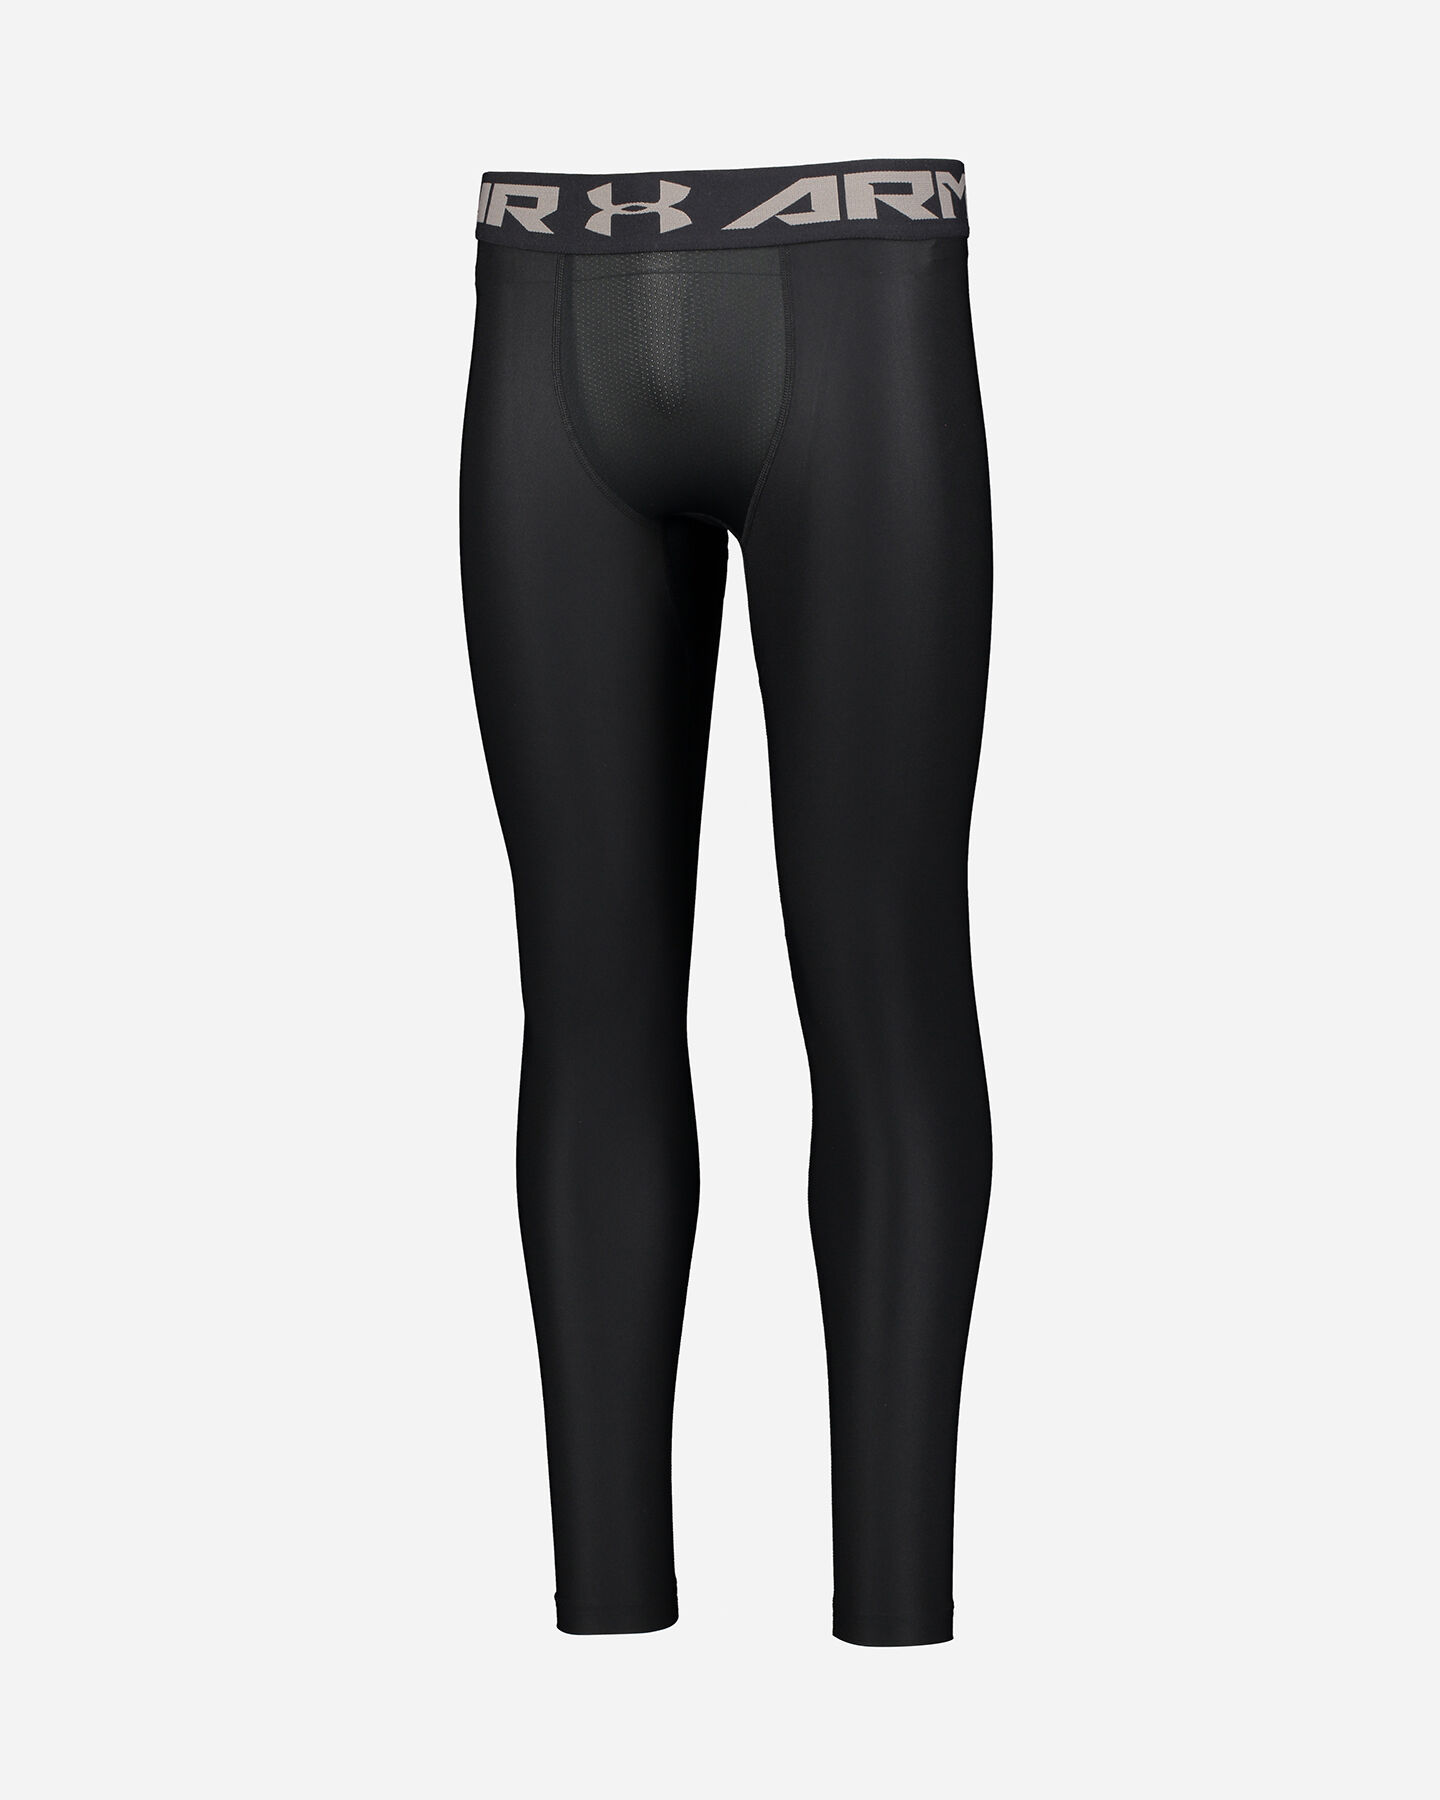  Pantalone training UNDER ARMOUR HG 2.0 M S5031436|0001|SM scatto 0